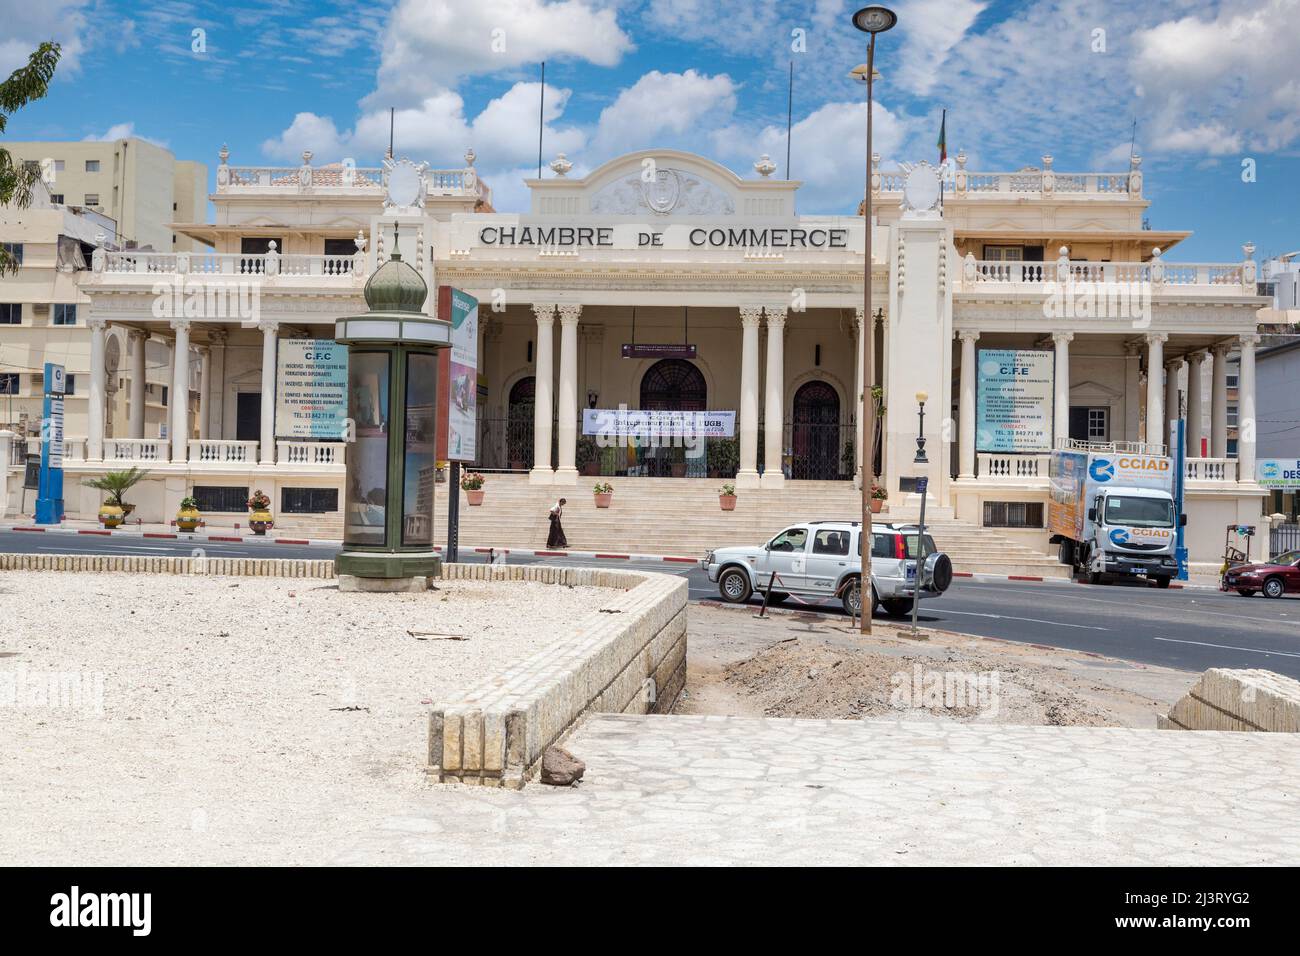 Dakar, Senegal.  Chamber of Commerce, in a Beaux Arts Architectural Style from the French Colonial Period. Stock Photo